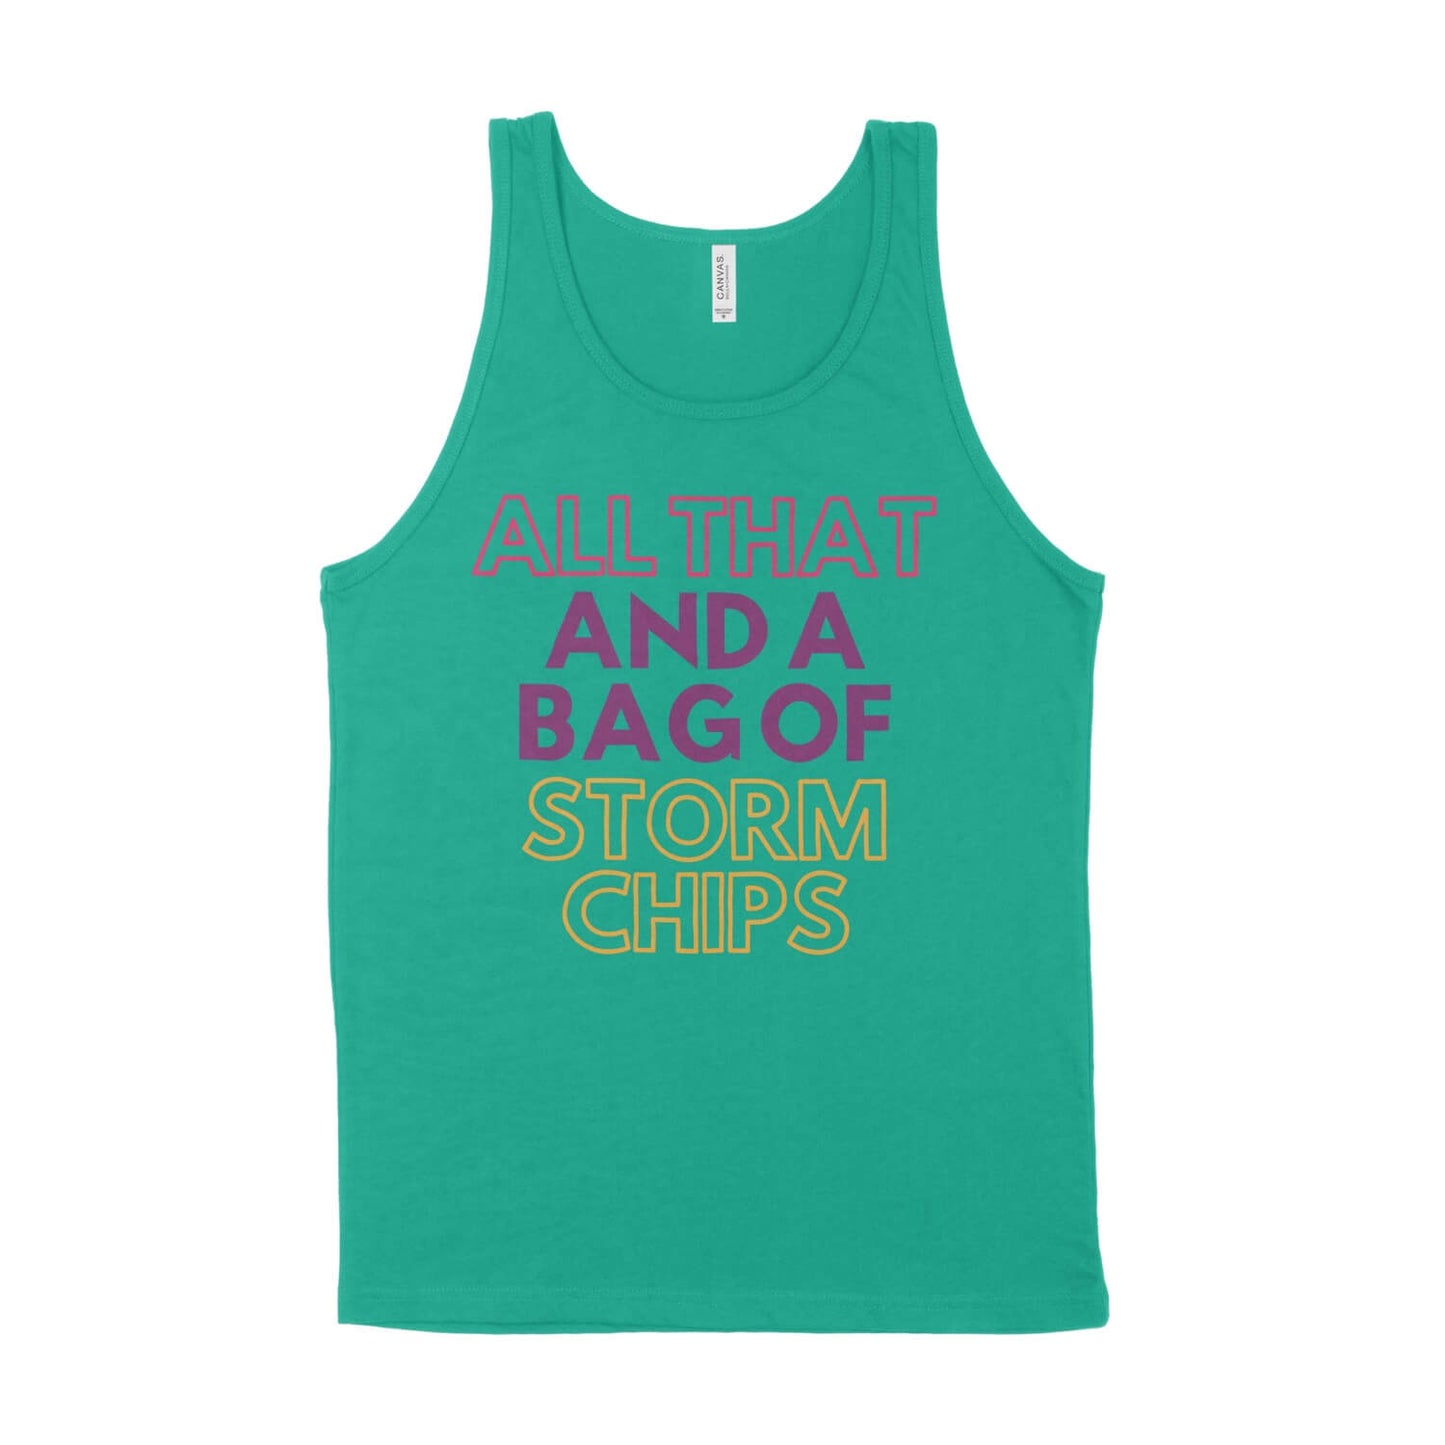 All That and a Bag of Storm Chips Unisex Tank Top